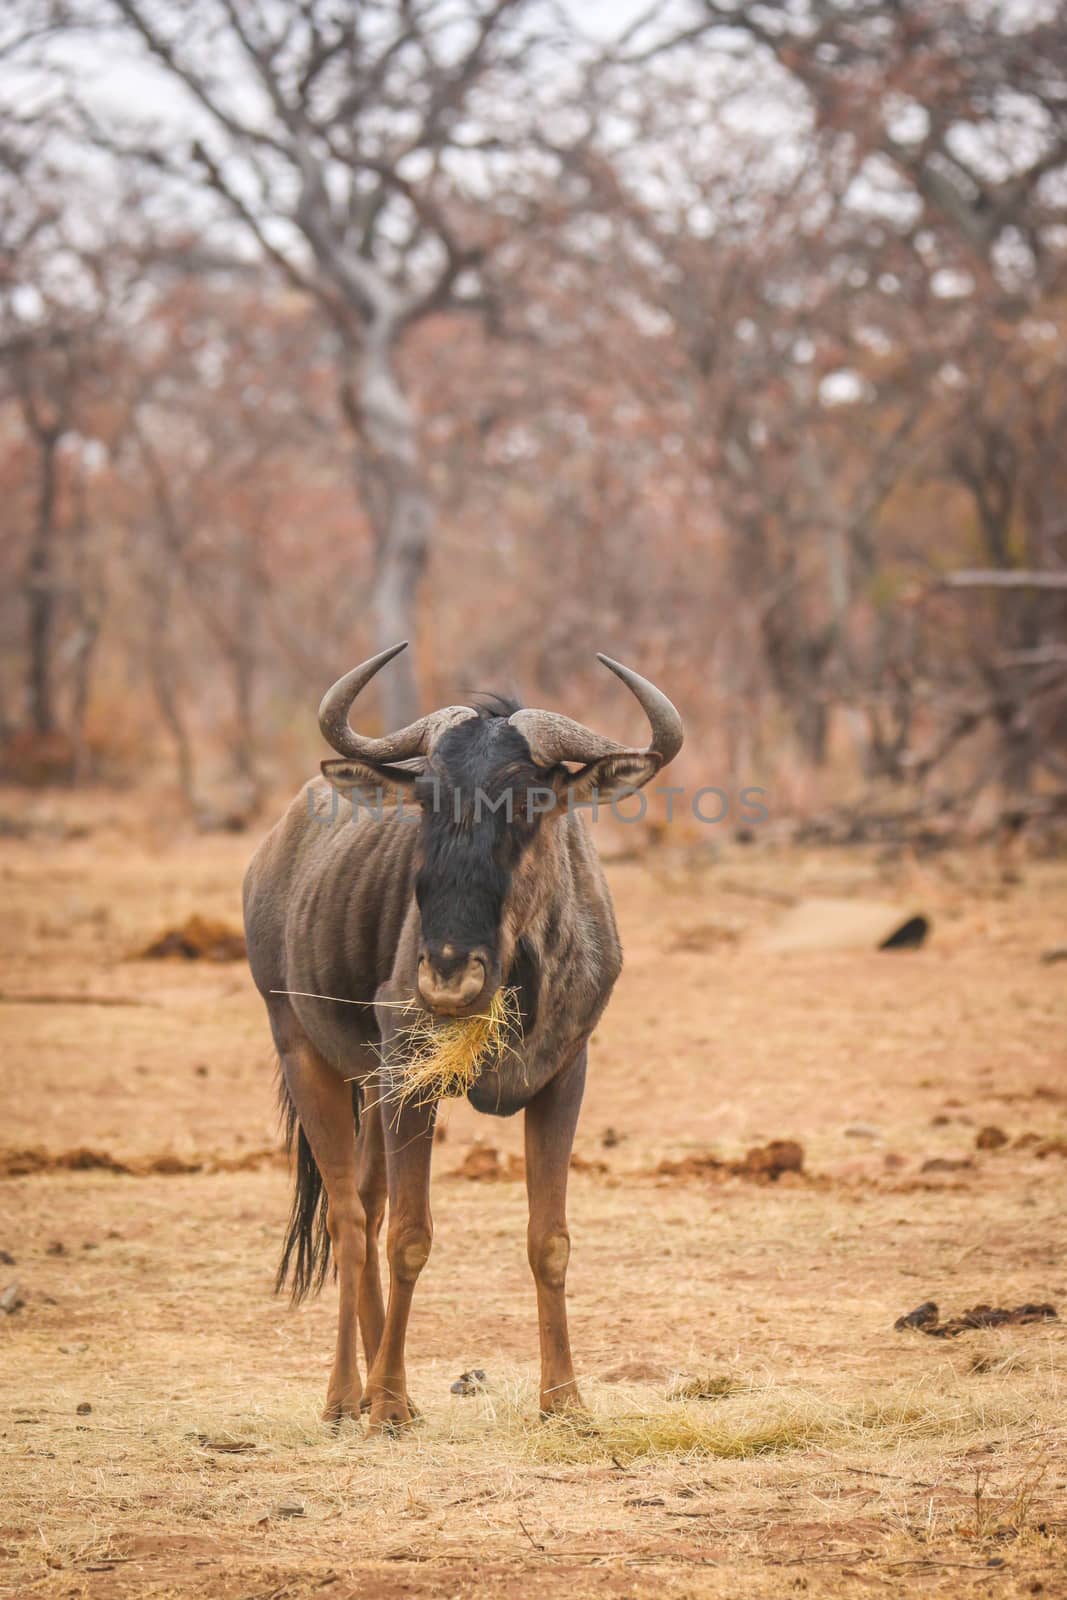 Blue wildebeest standing in the grass and eating. by Simoneemanphotography